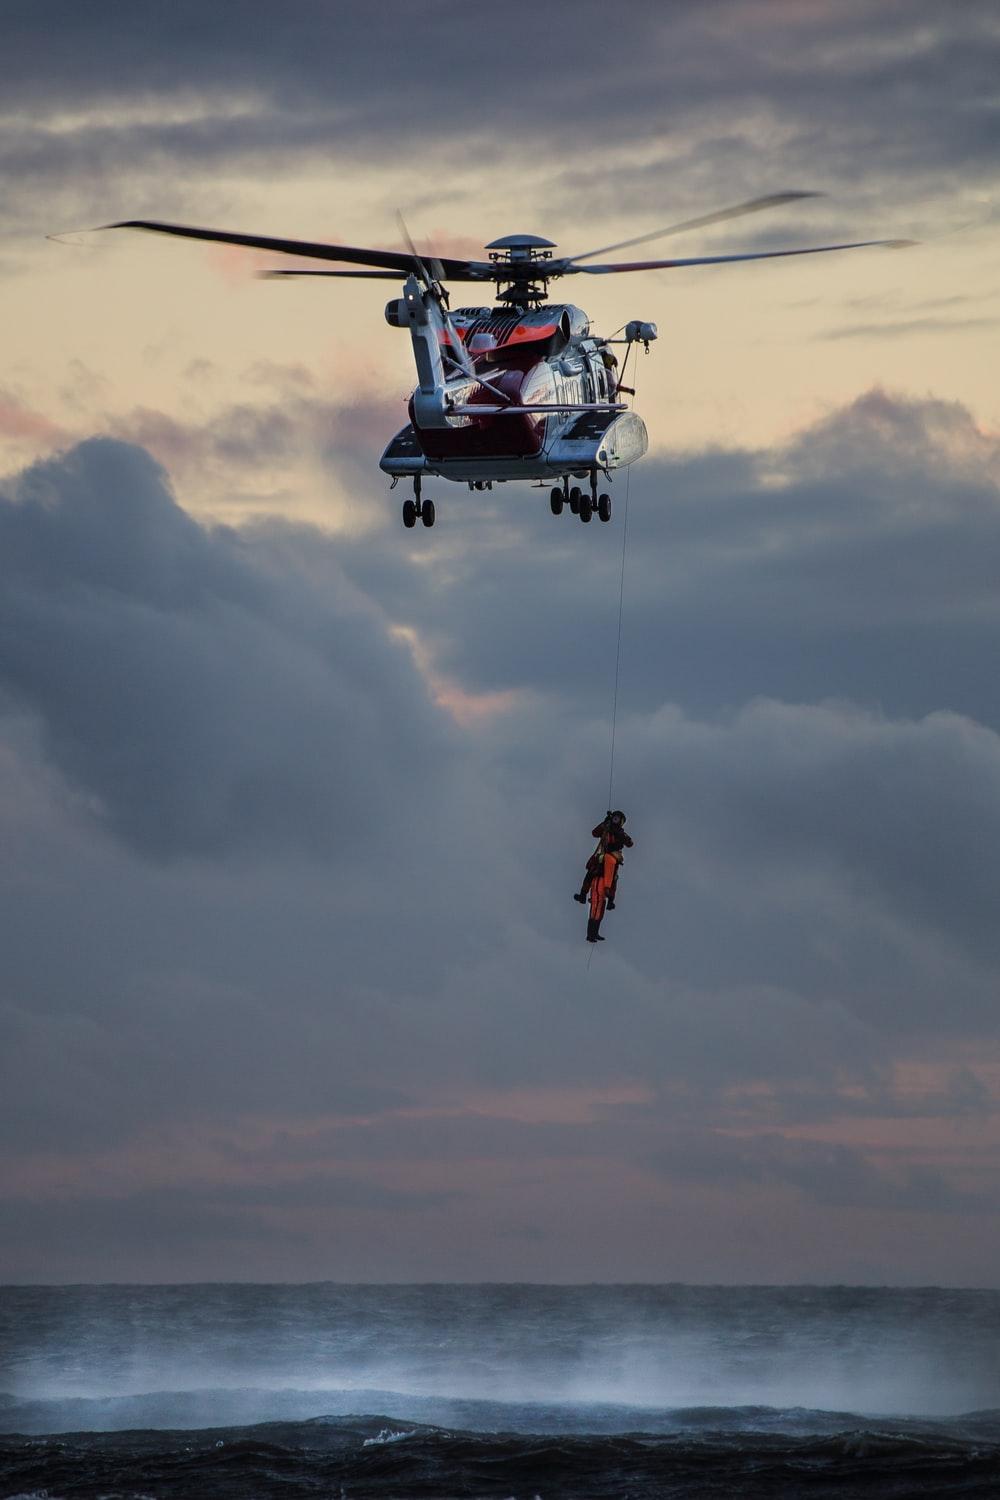 Rescue Helicopter Picture. Download Free Image